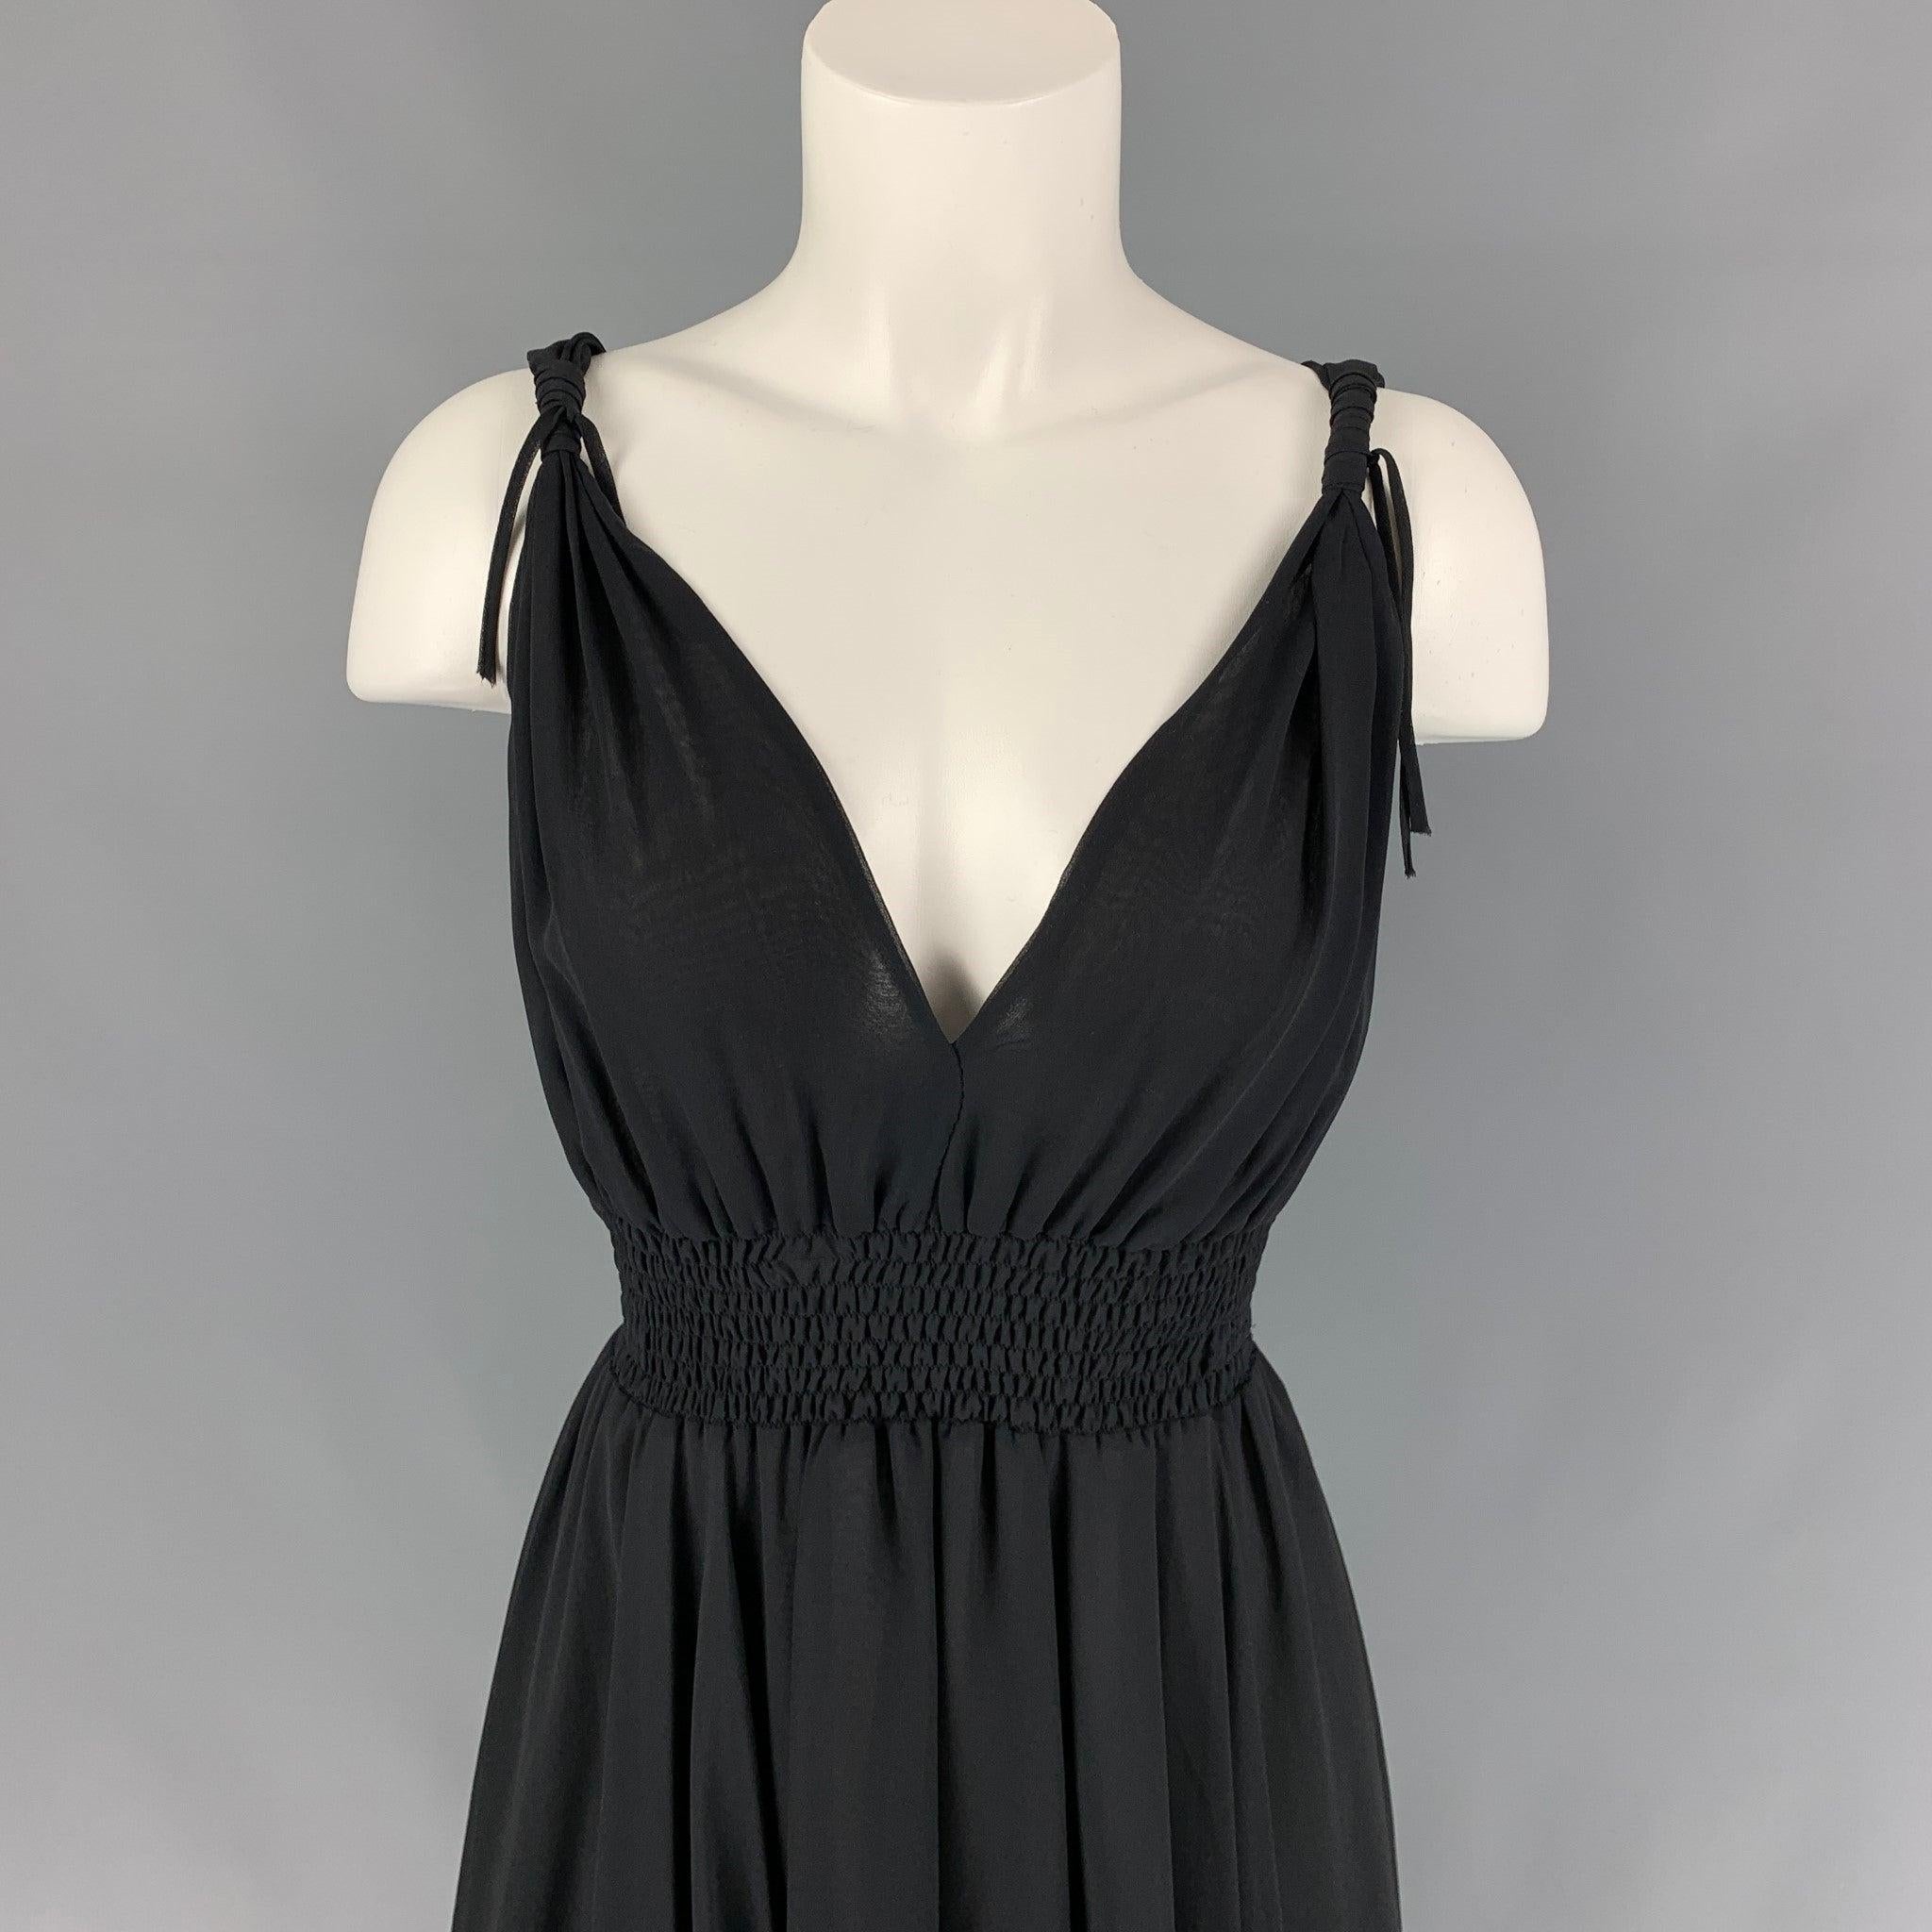 JOHN RICHMOND dress comes in a black chiffon material featuring an a-line style, elastic waist, and knotted strap details.
Very Good
Pre-Owned Condition. Fabric tag removed. 

Marked:   Size tag removed.  

Measurements: 
  Bust: 28 inches  Waist: